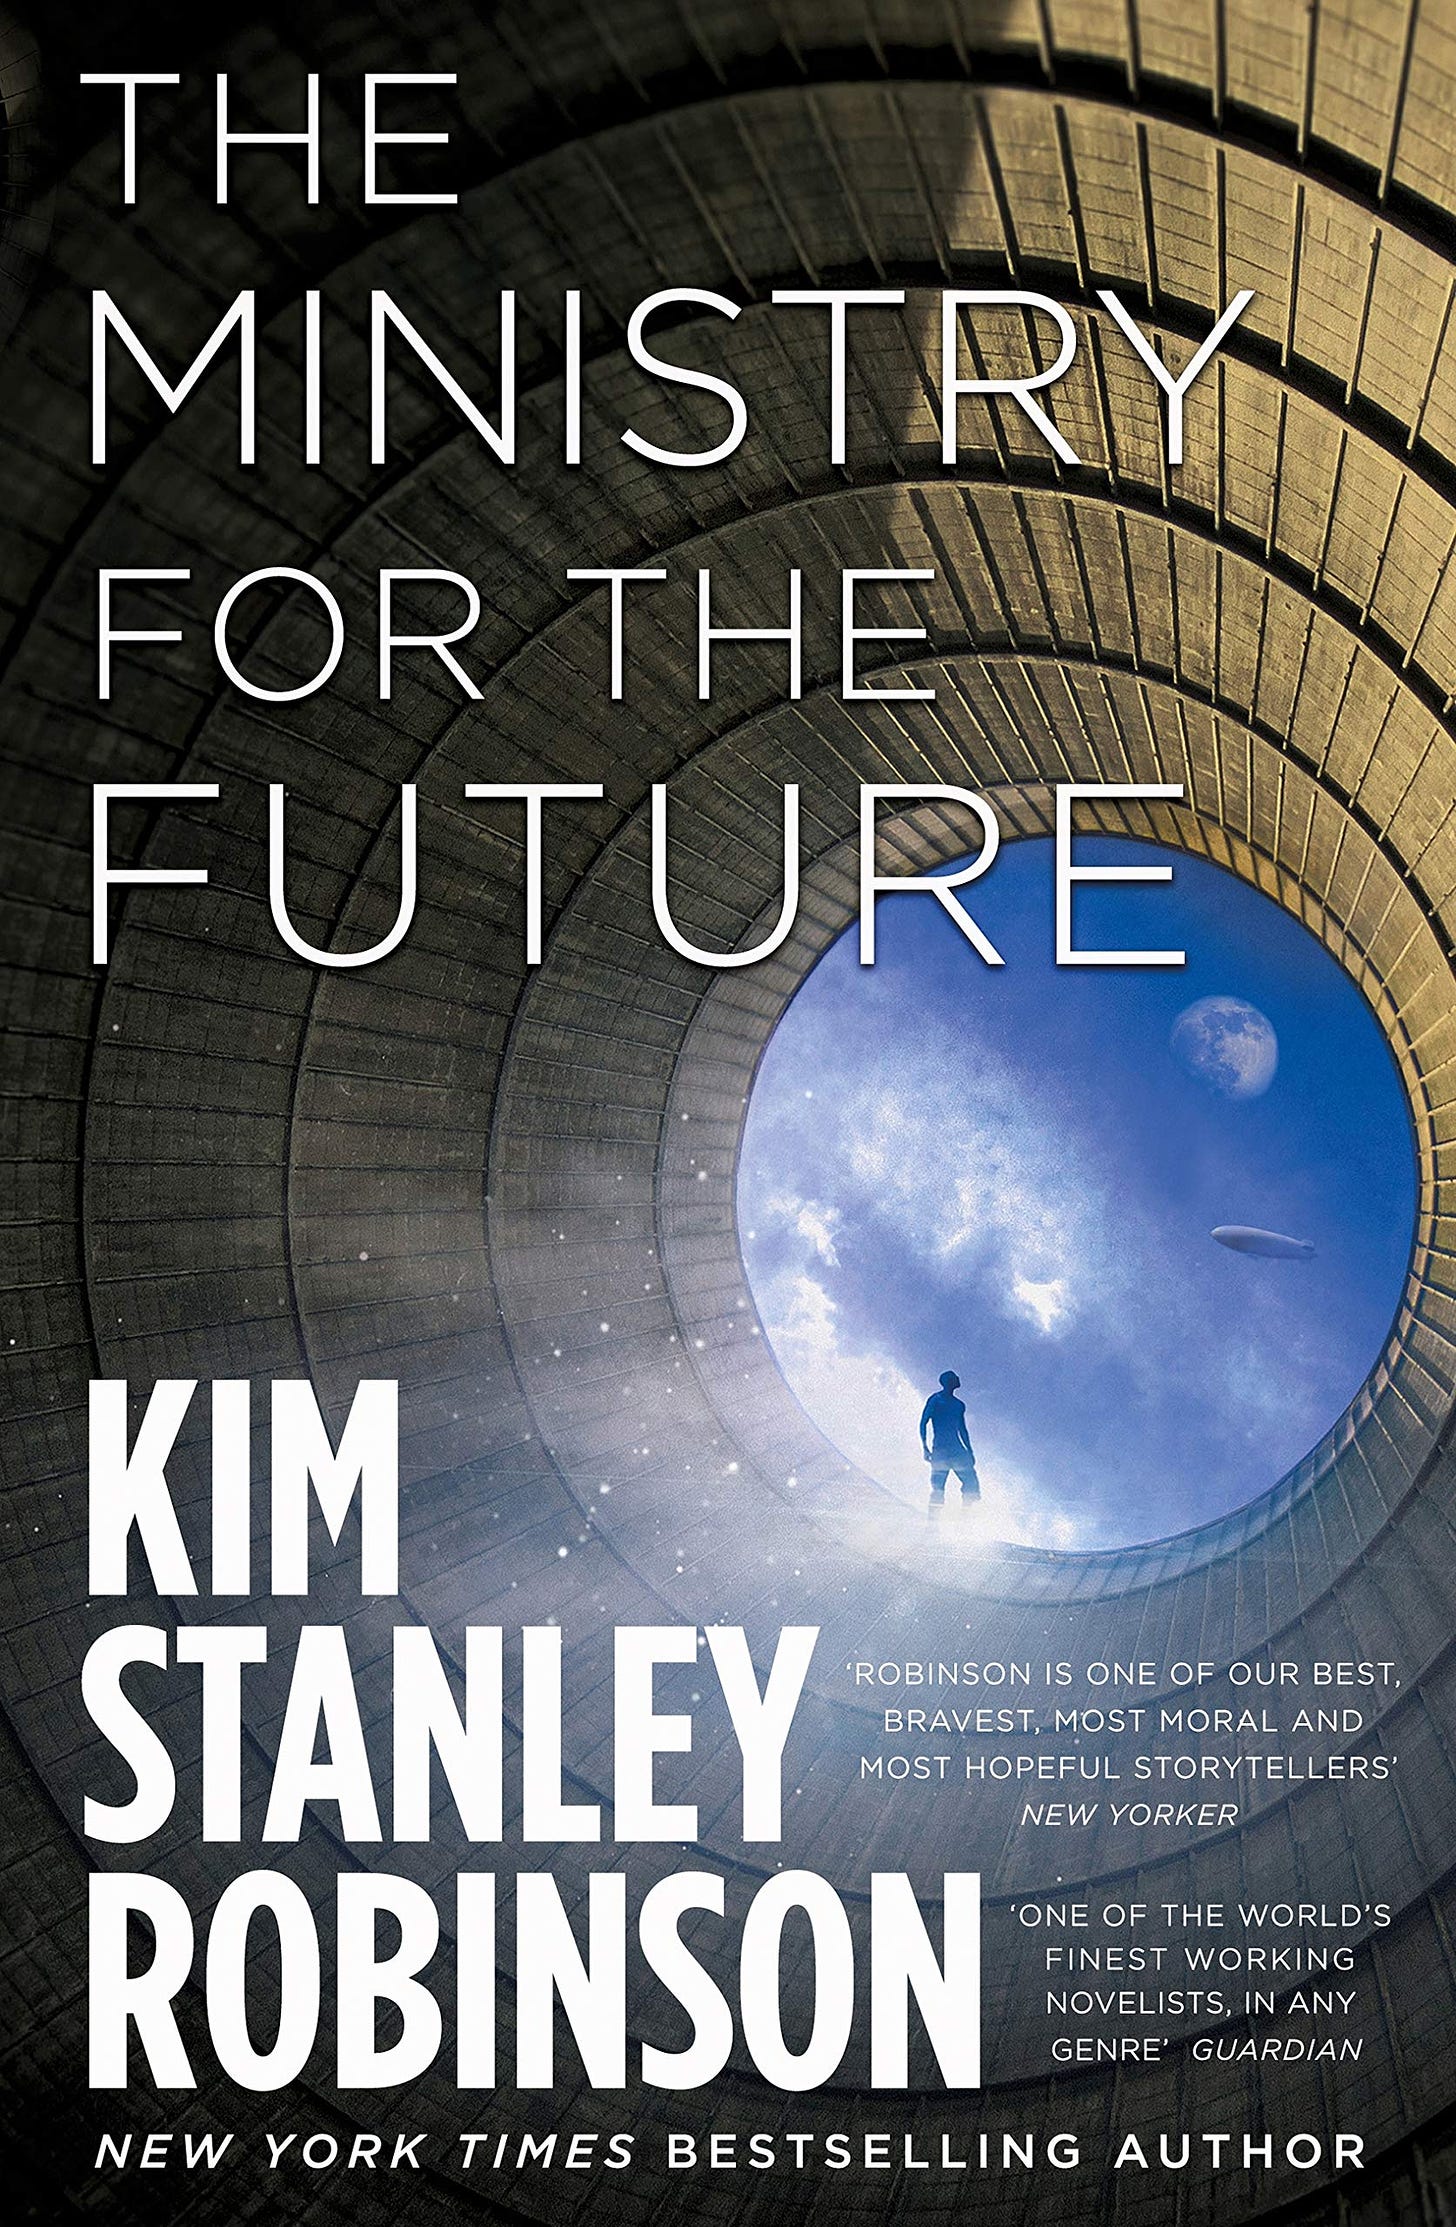 The Ministry for the Future by Kim Stanley Robinson | Goodreads